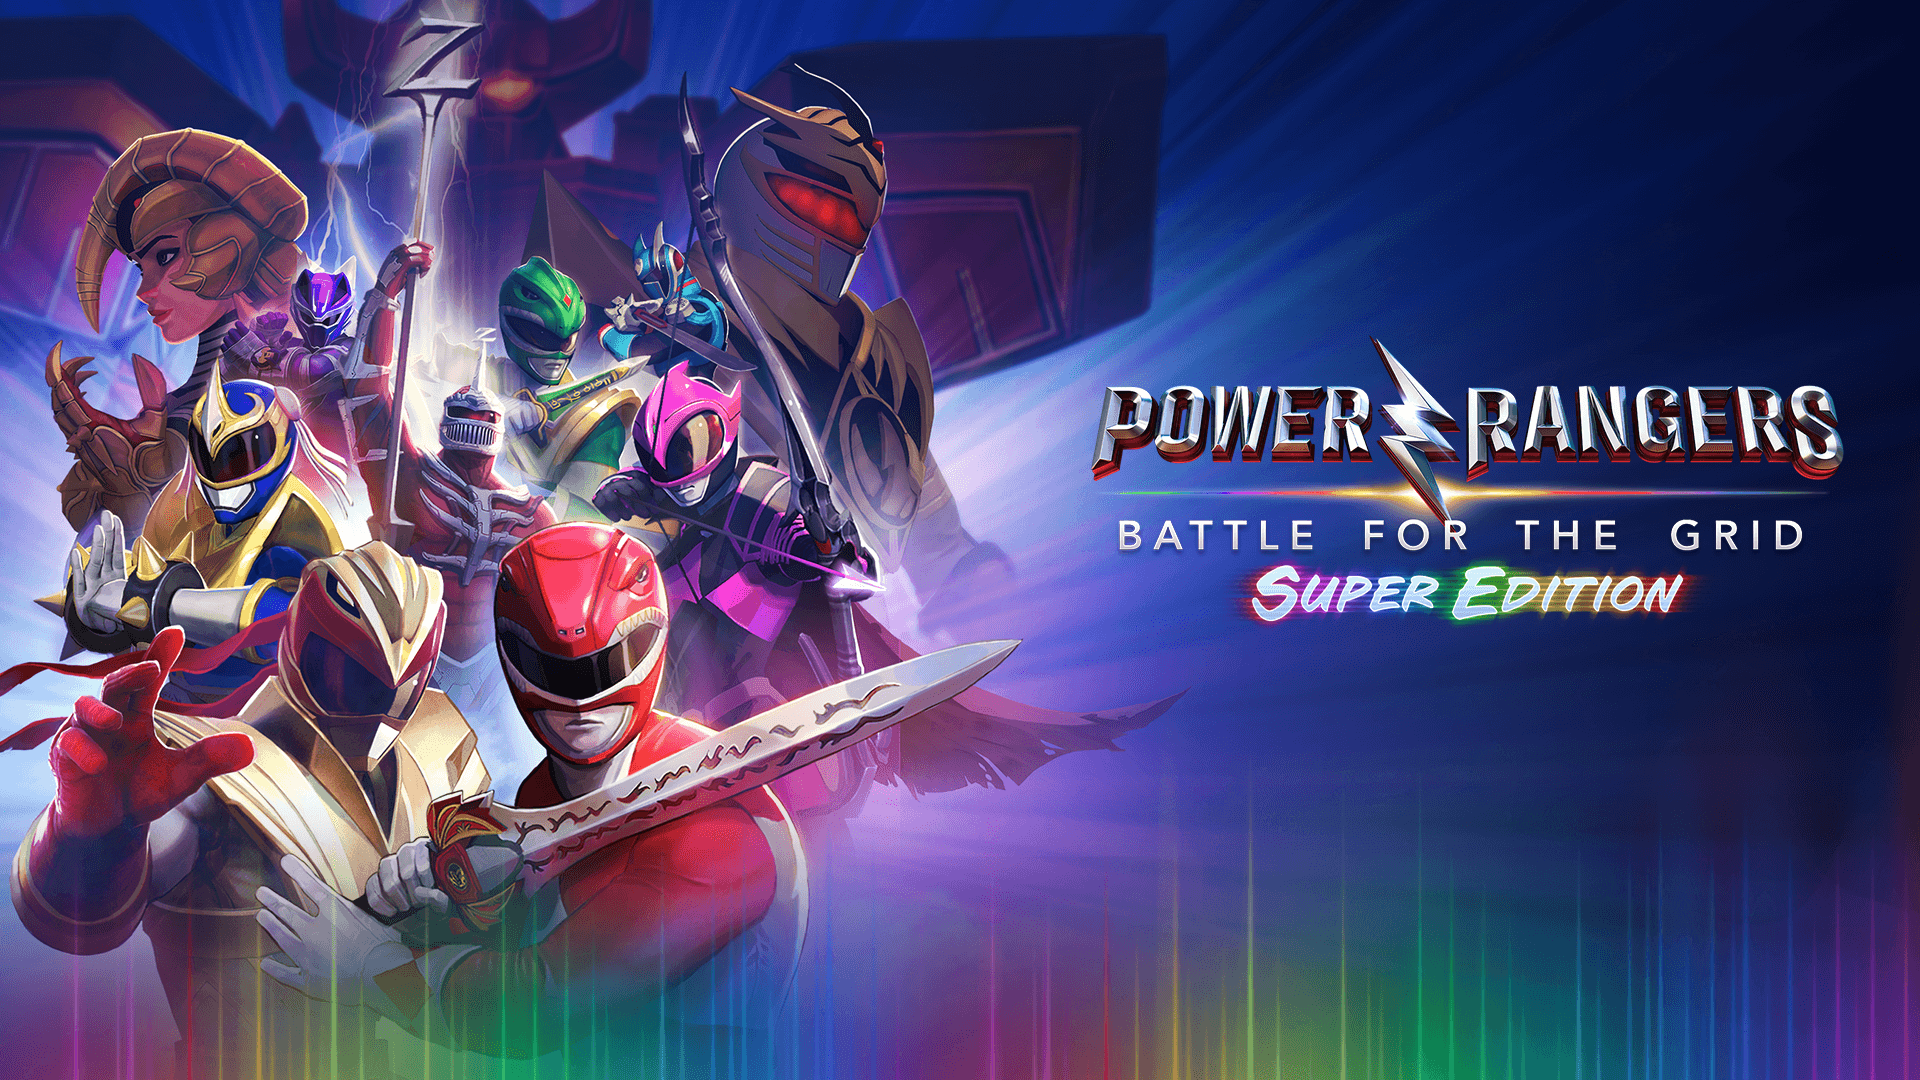 Power Rangers: Battle for the Grid Super Edition, Street Fighter